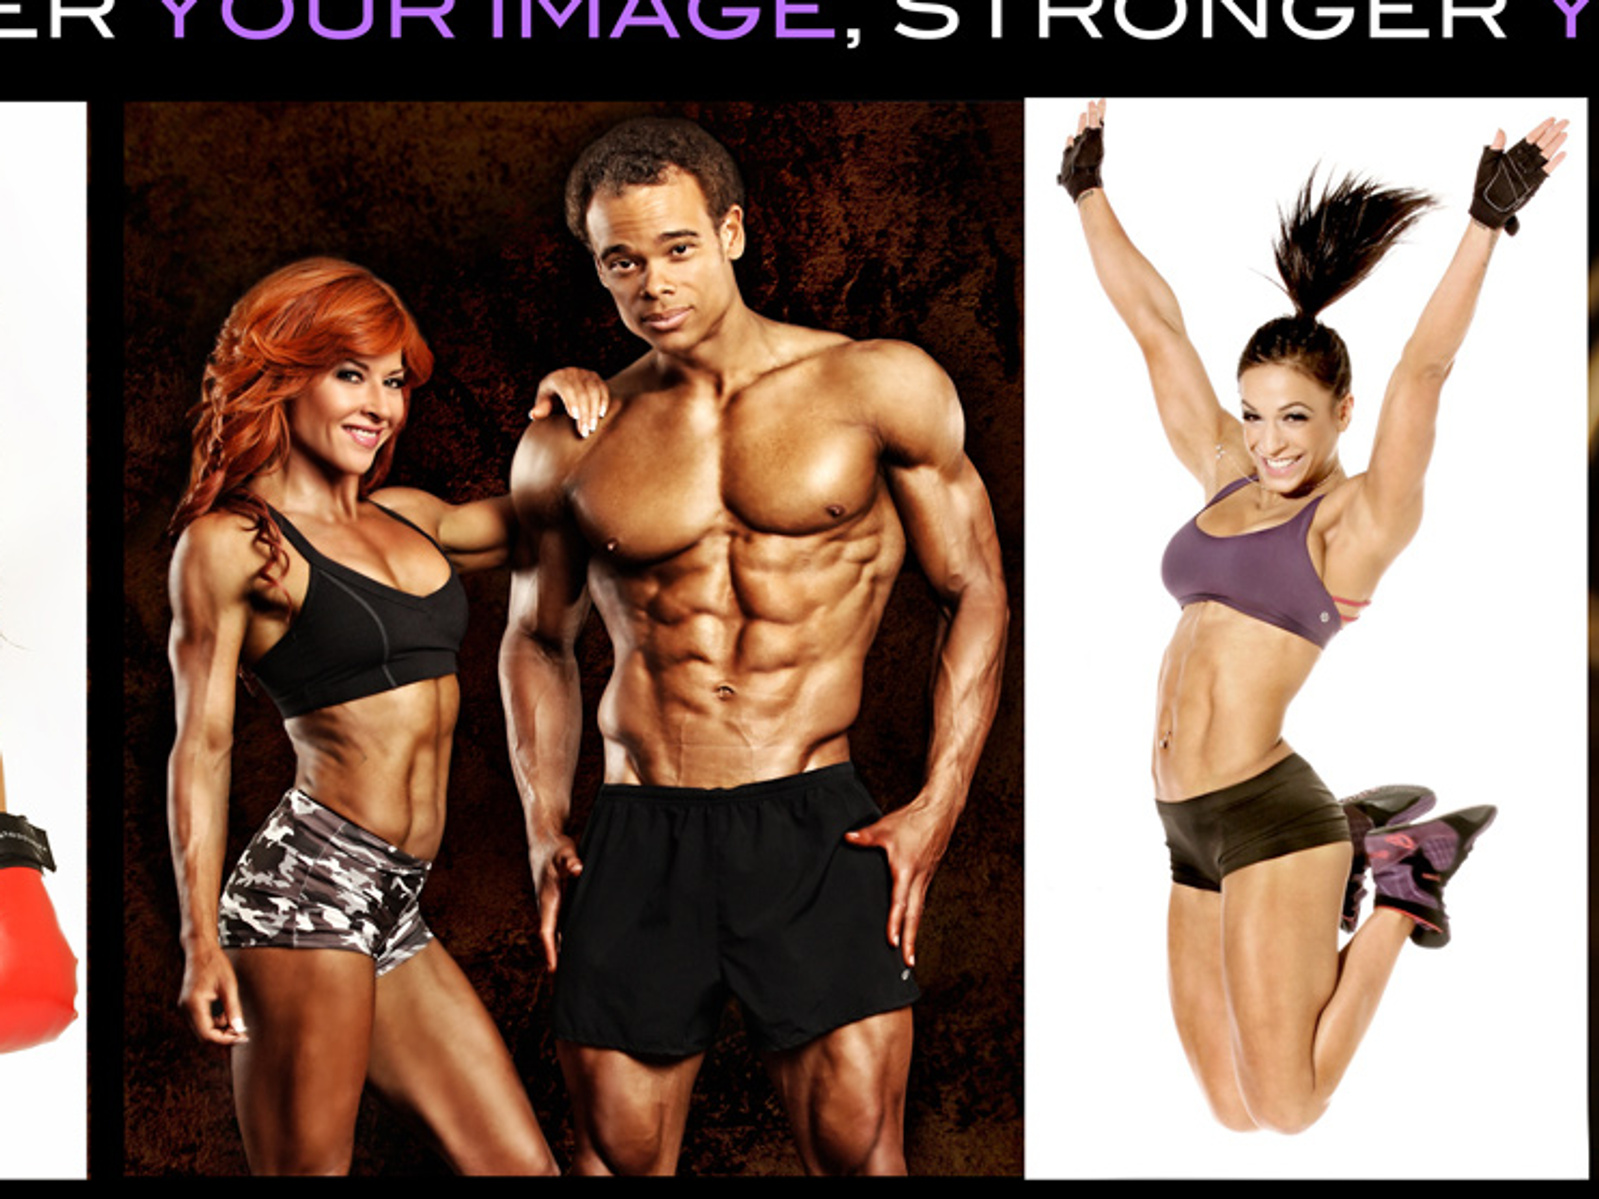 Luxury photo boutique specializing for fitness, bodybuilding, competition  photography - professional Fitness Photography